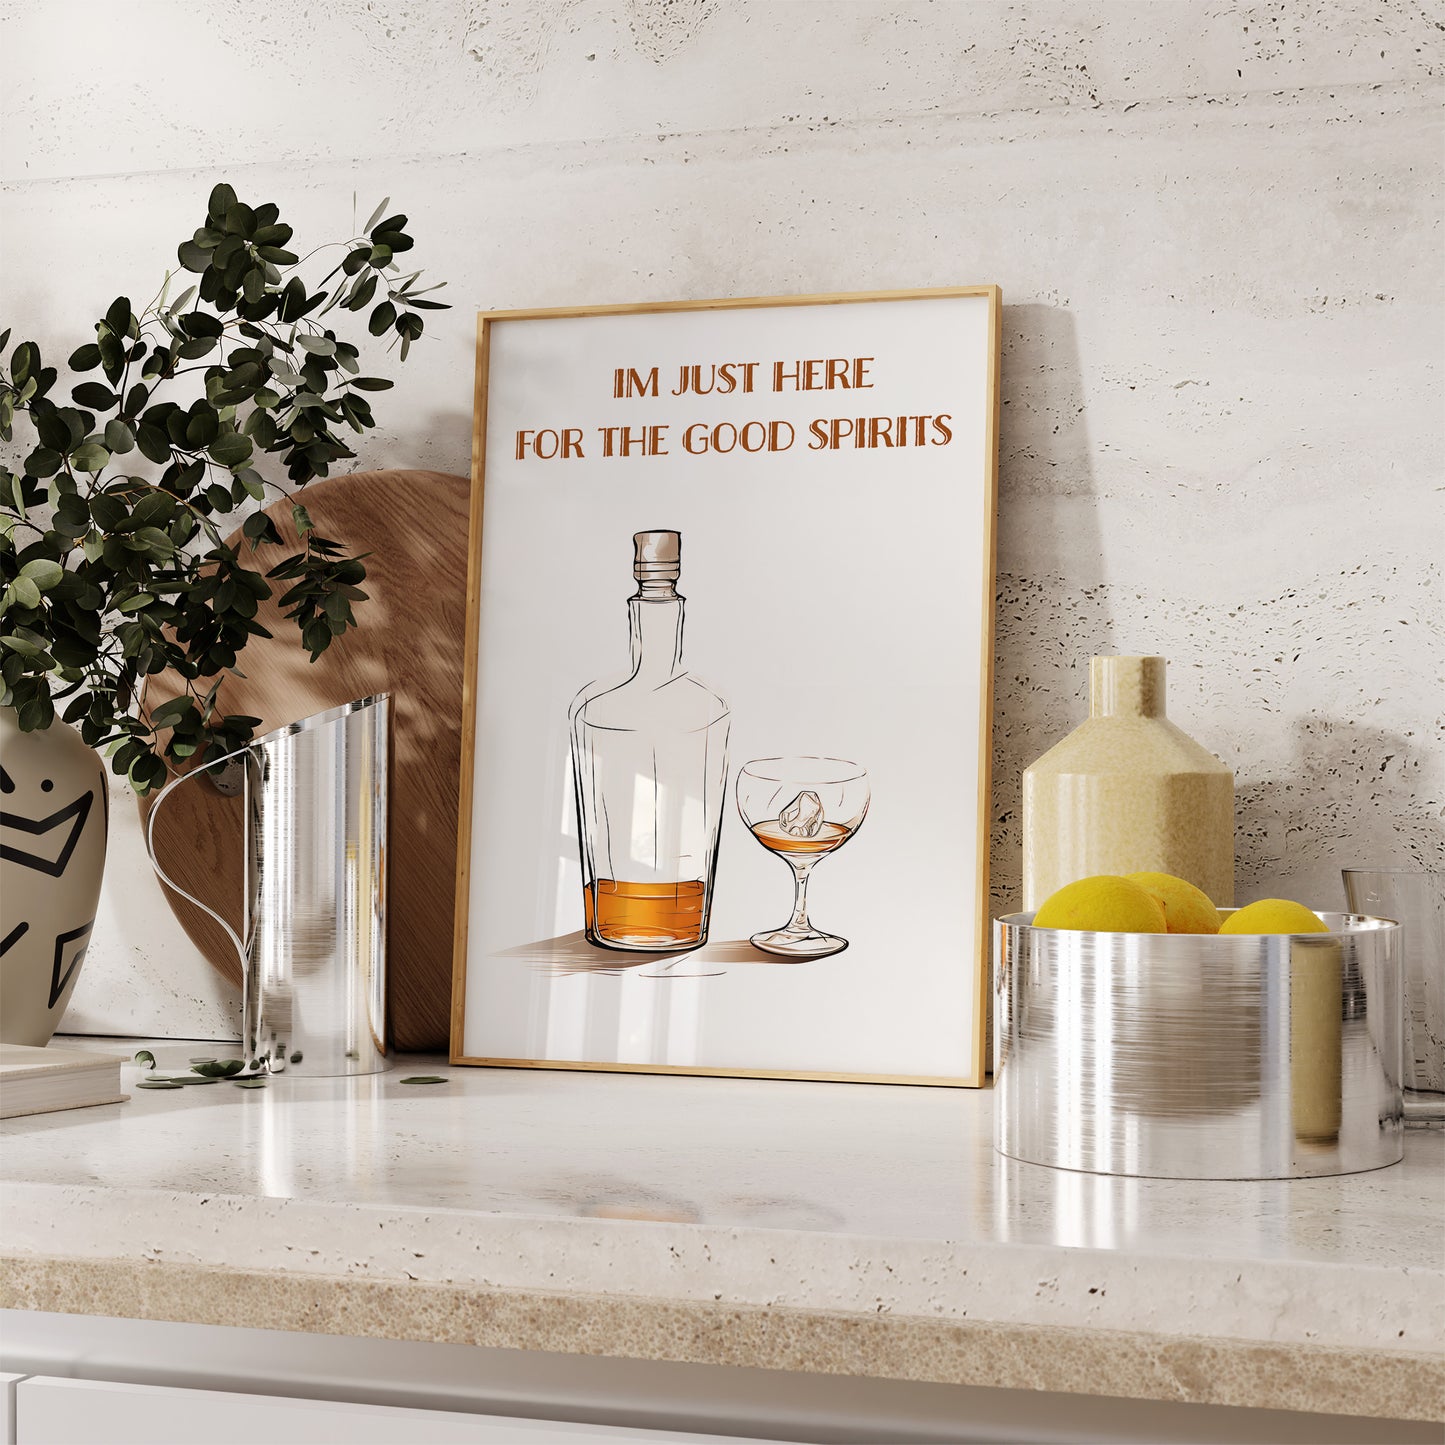 A framed quote on a kitchen countertop says "I'm just here for the good spirits" with a drawing of a liquor bottle and glass.